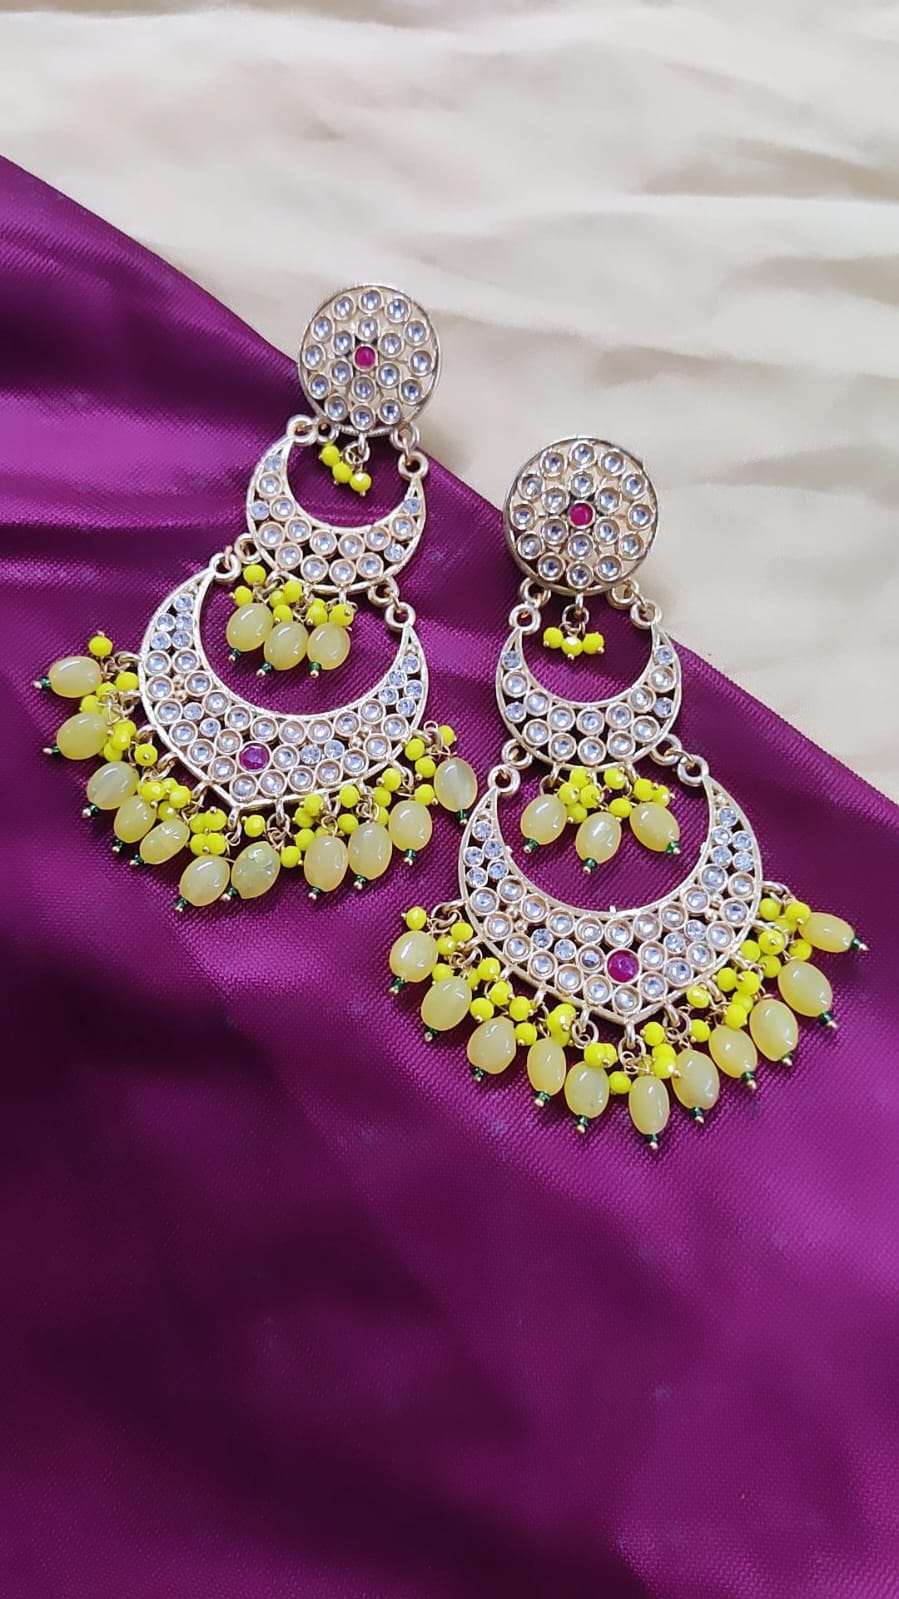 Meenakari & Kundan Chandbali Earrings with Pearls for Women & Girls Gold  Plated in Light weight at Rs 165/pair | New Delhi | ID: 27287744362